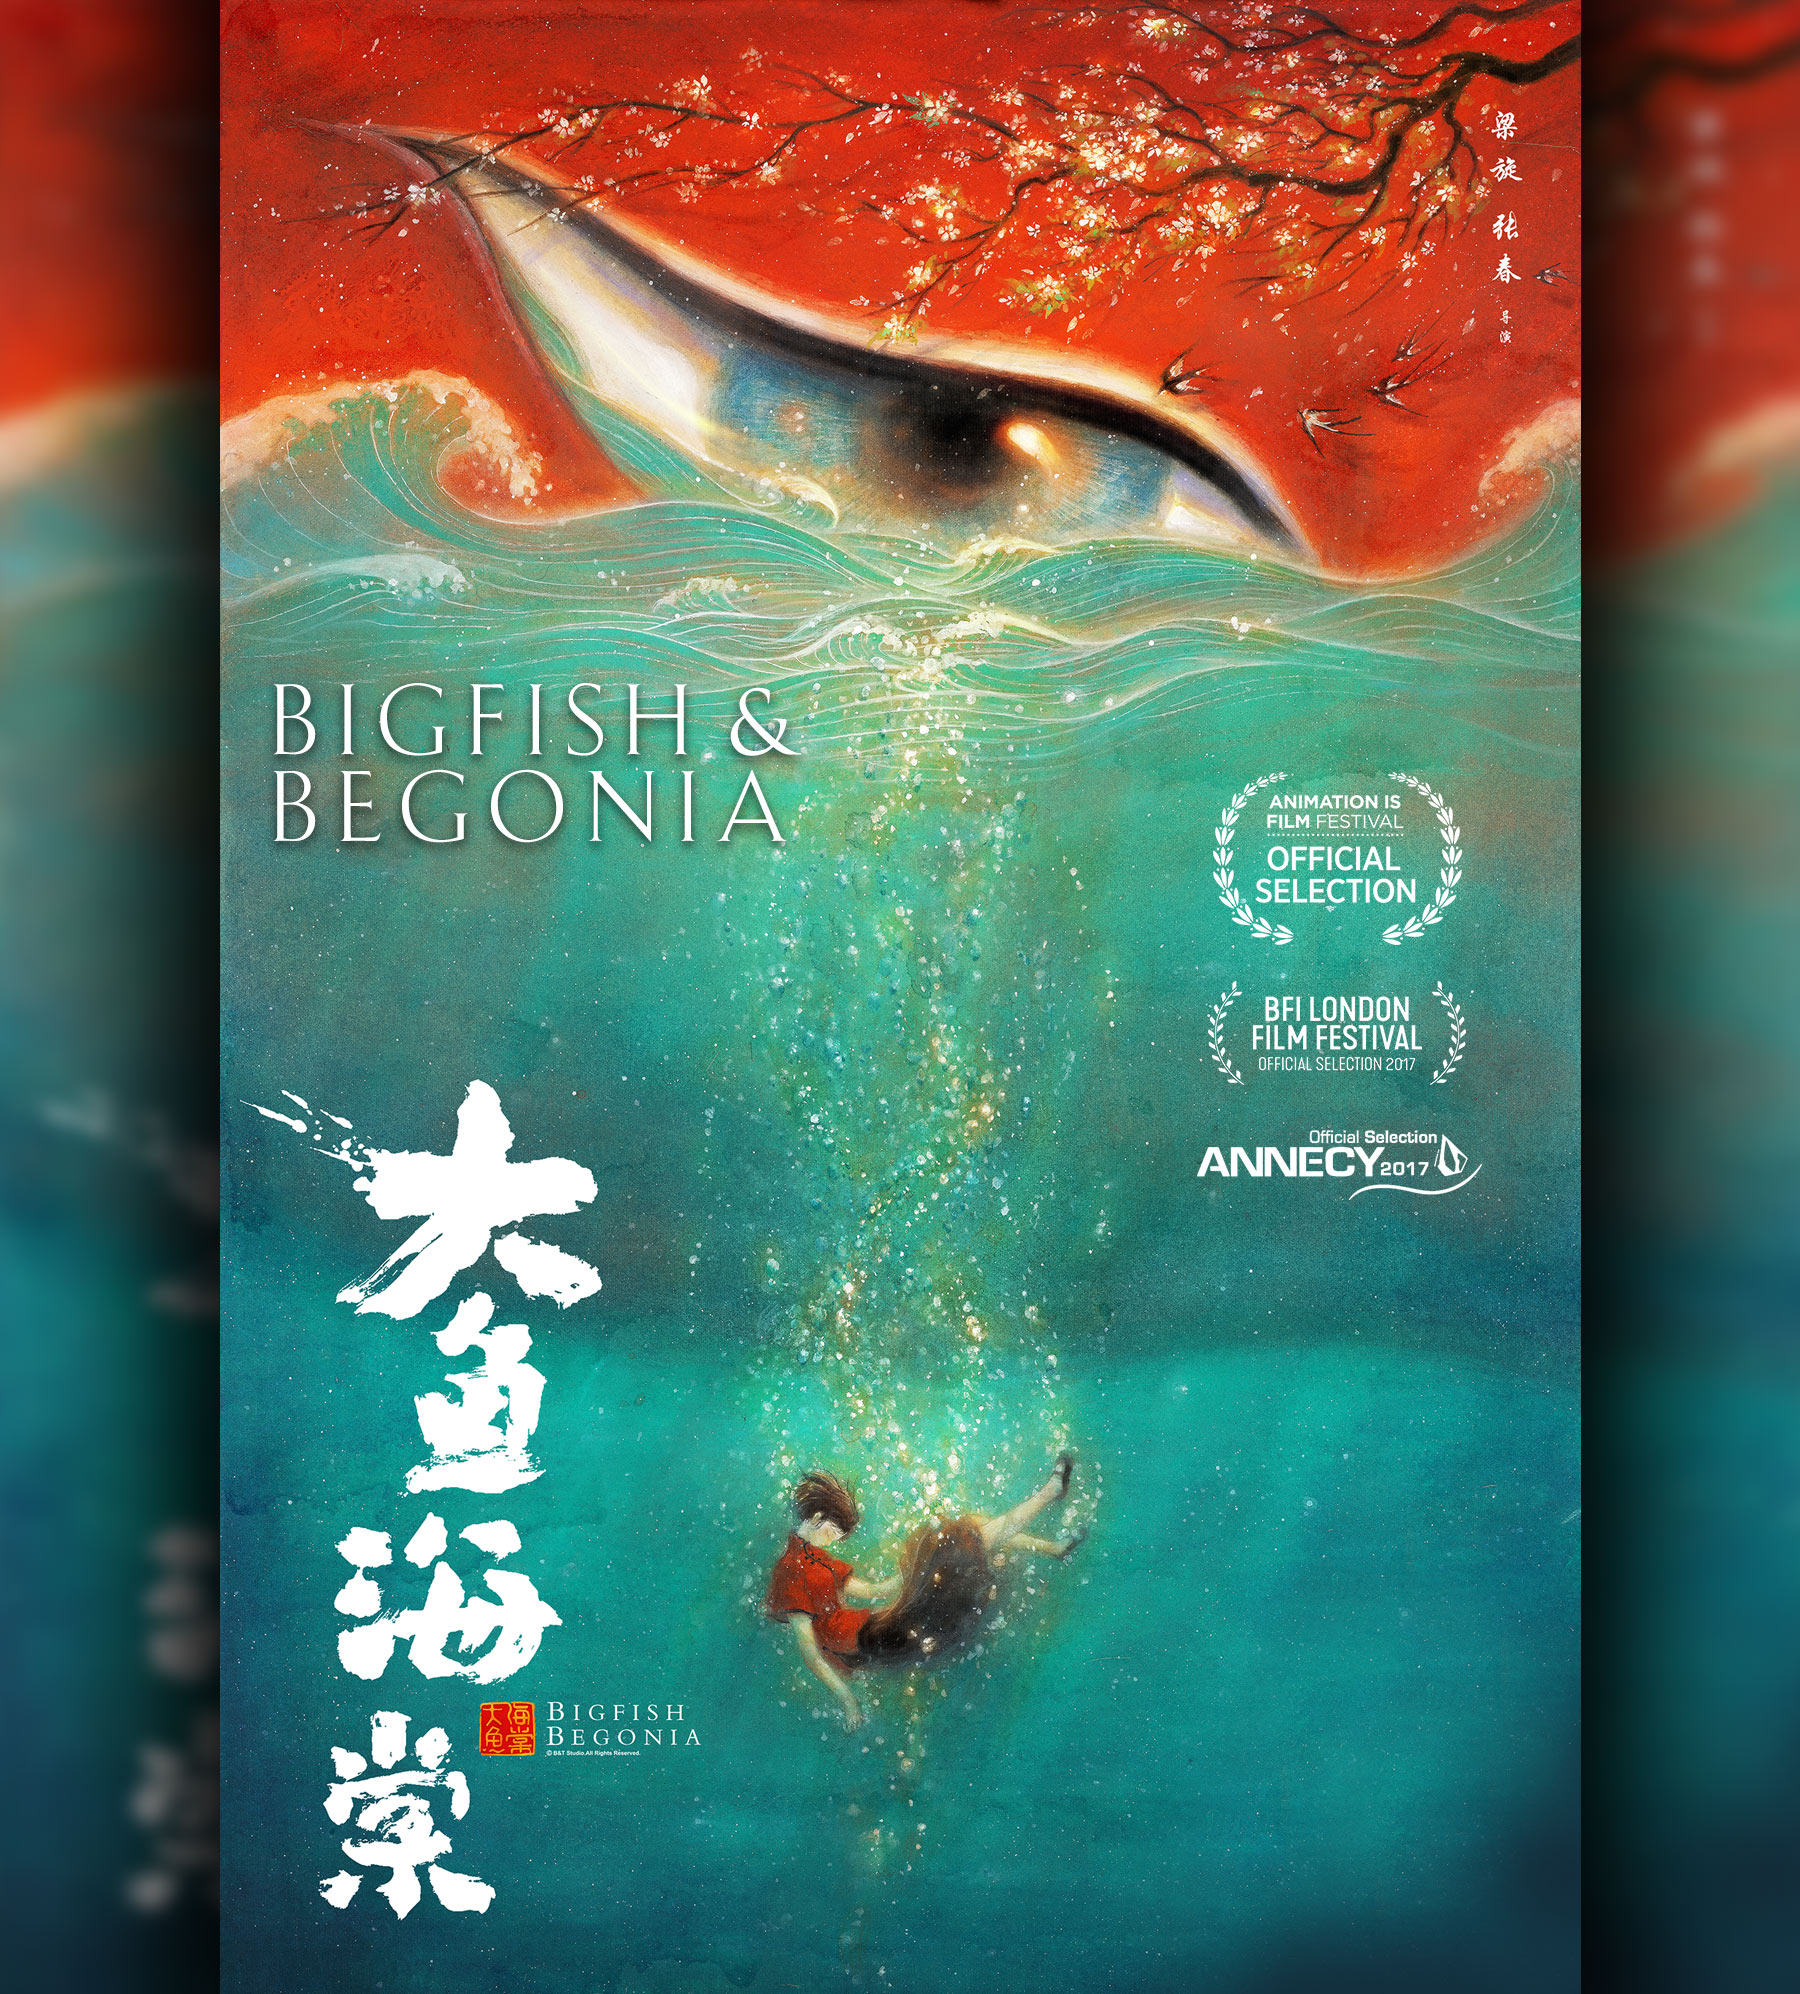 Big Fish & Begonia - Official Selection Animation is Film Festival, Official Selection 2017 BFI London Film Festival, Official Selection Annecy 2017